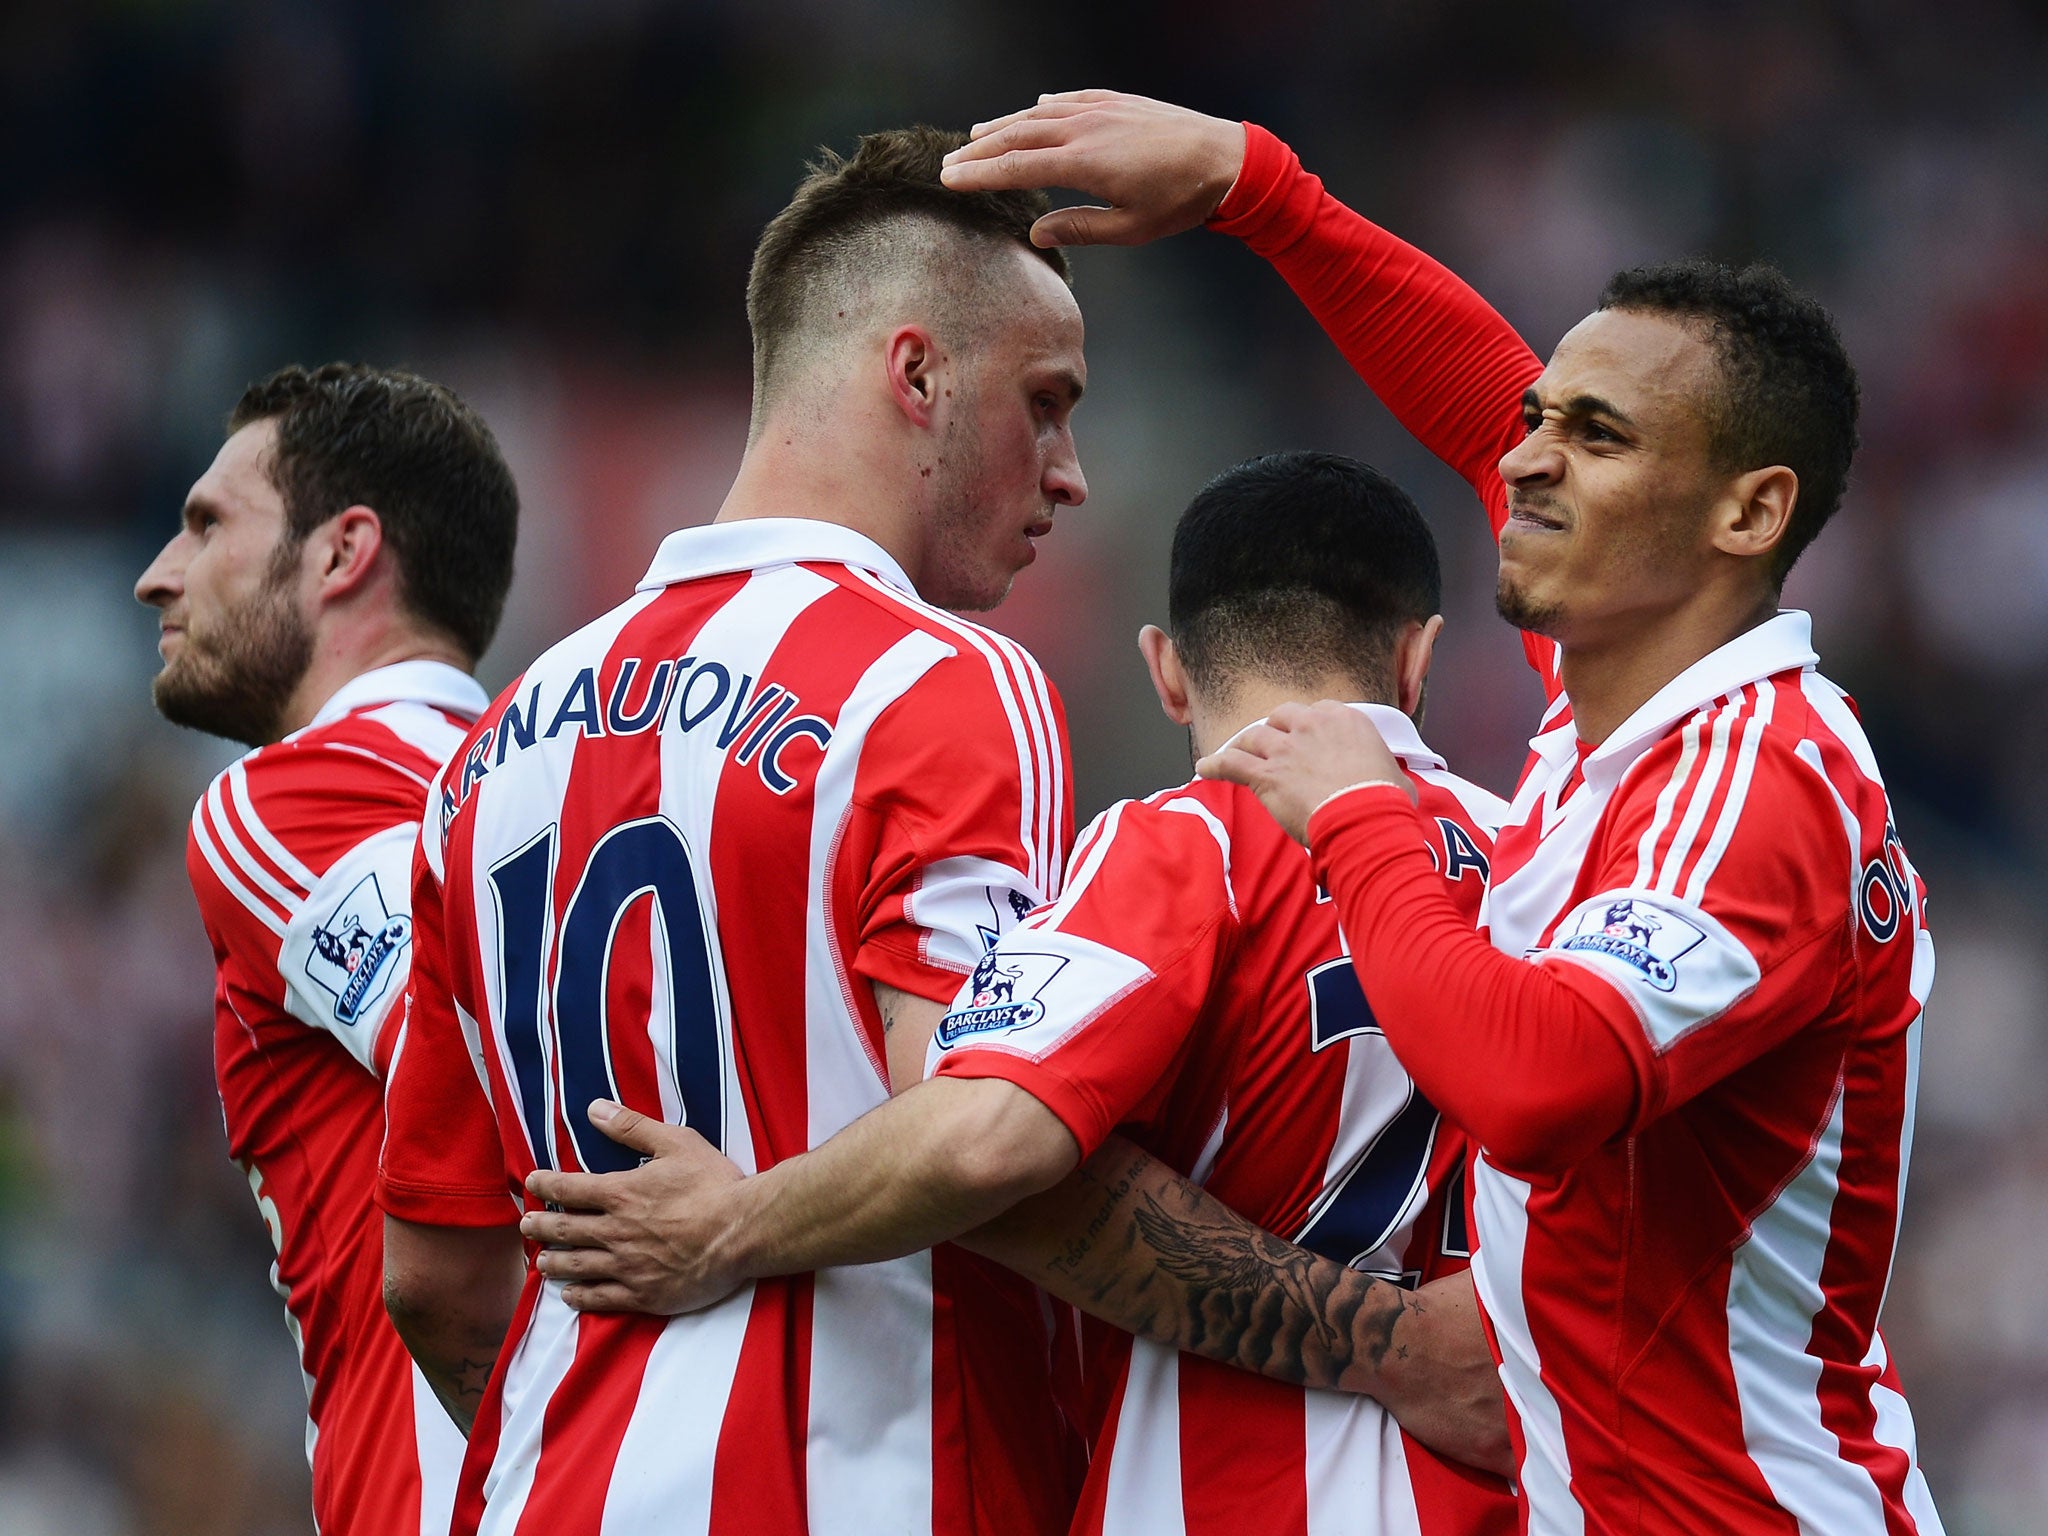 Stoke players celebrate after Peter Odemwingie's opening goal